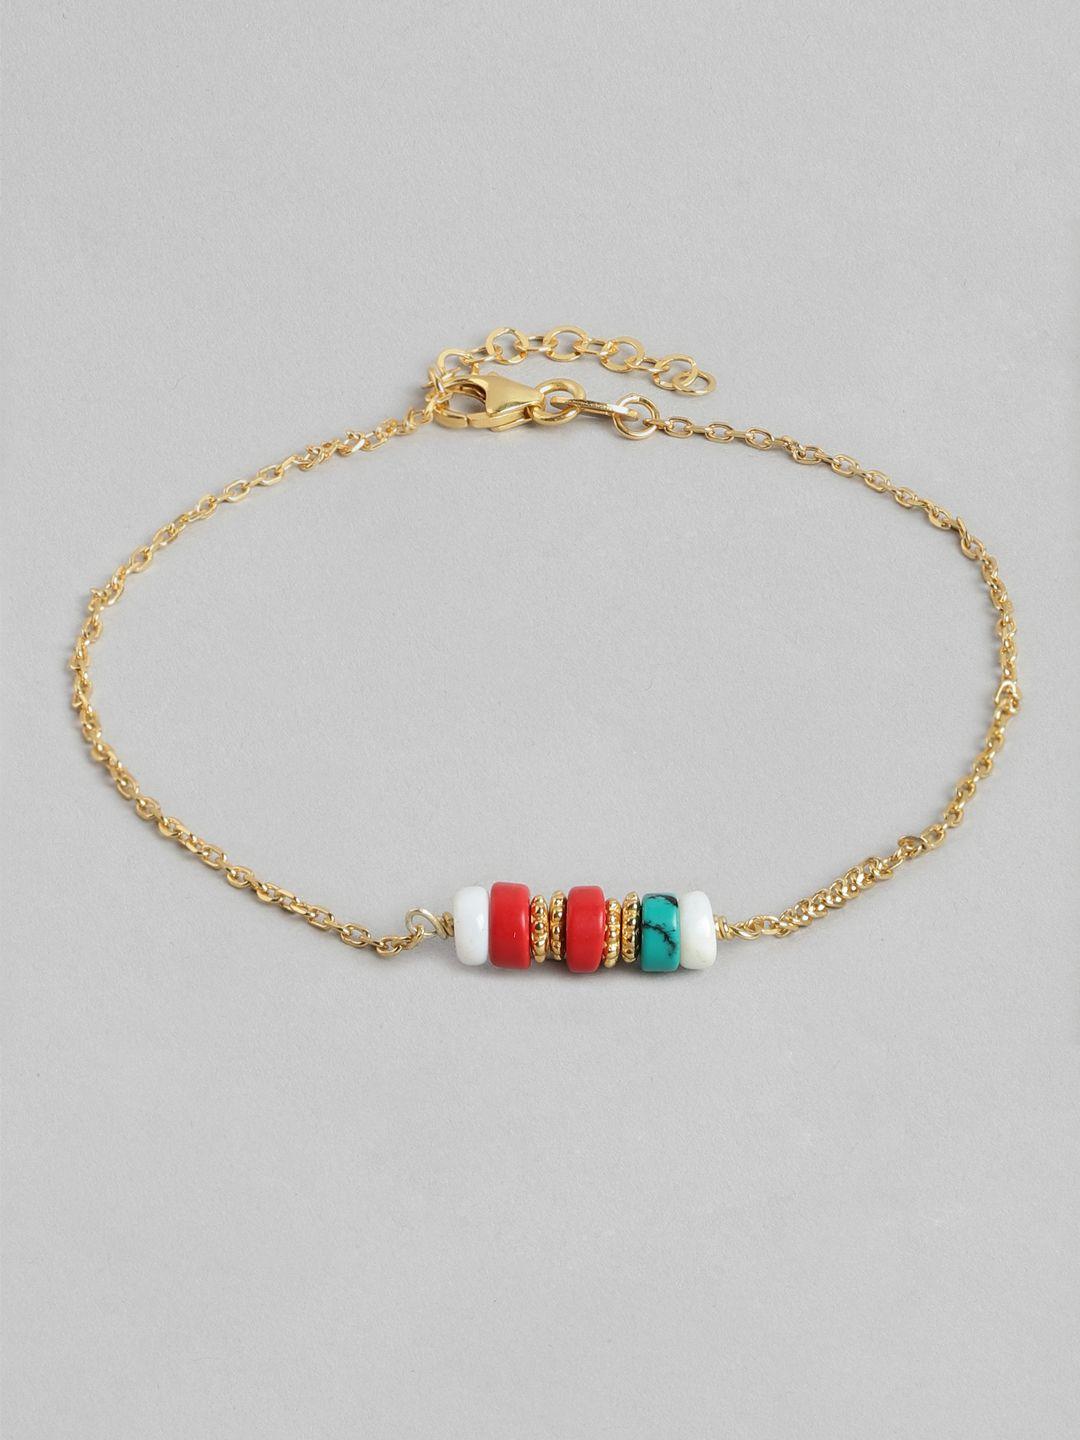 carlton london gold-plated brass anklet